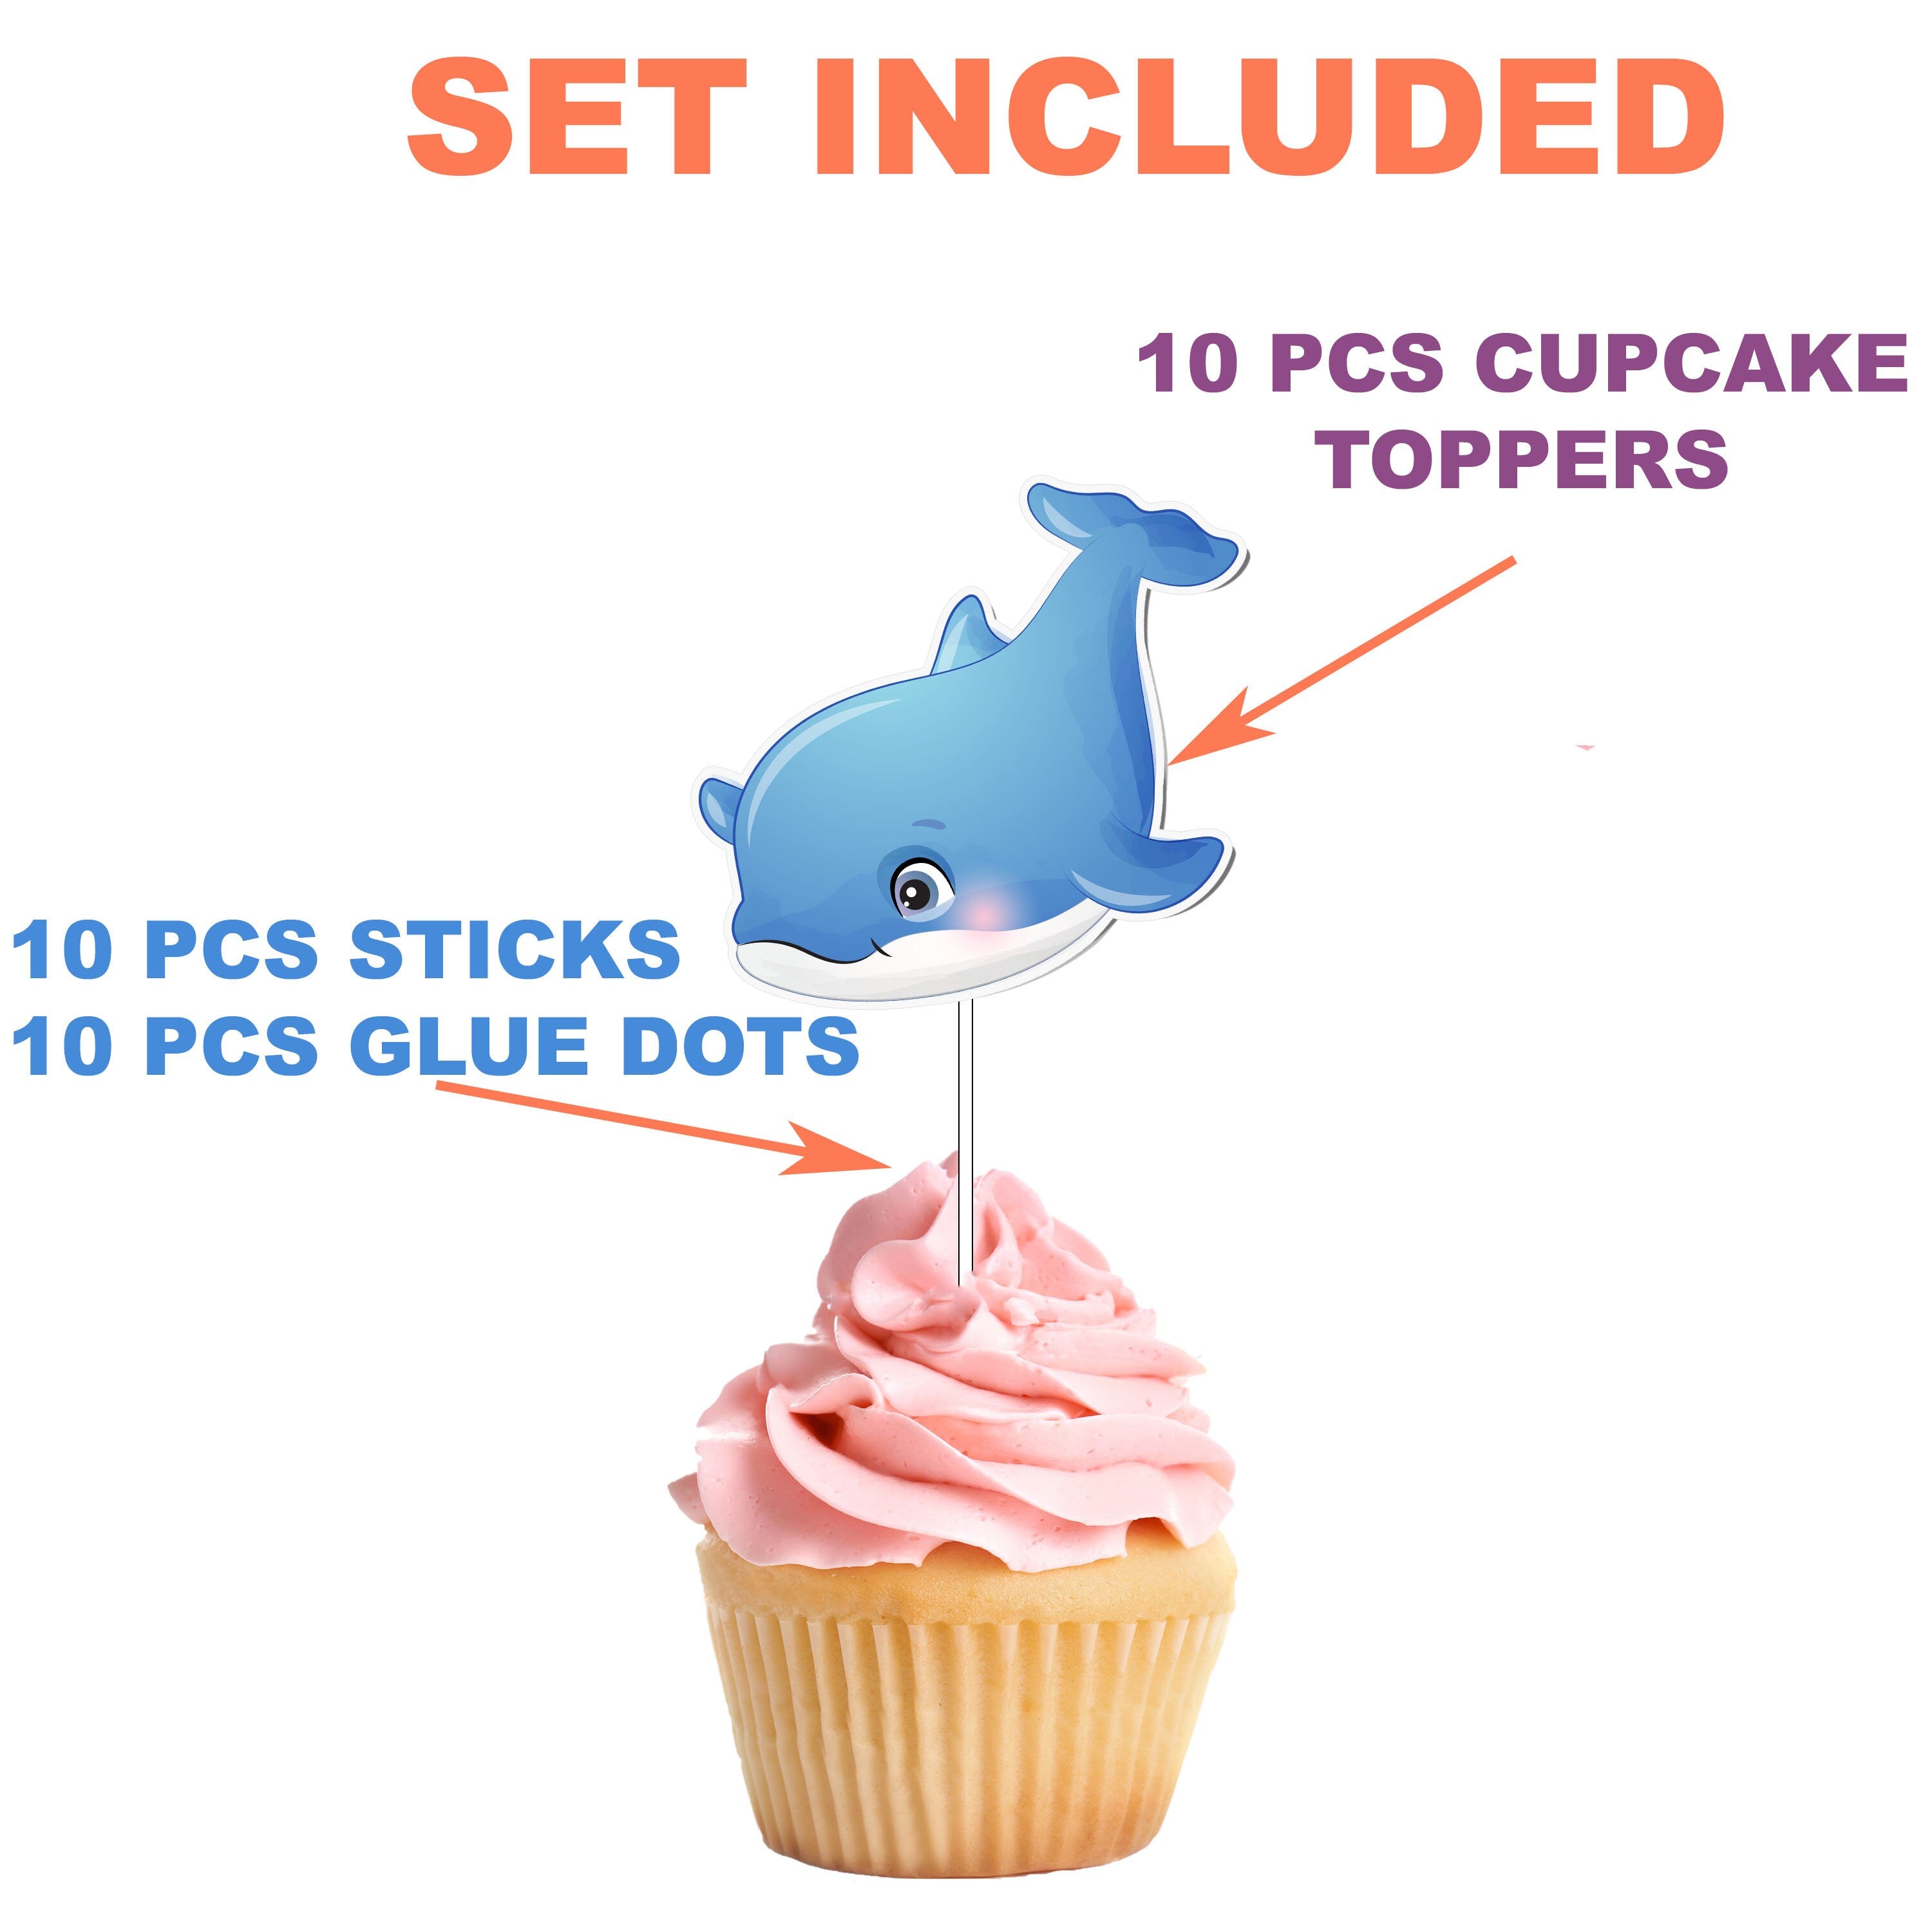 "Dolphin Delight" Cupcake Toppers - Make a Splash at Your Celebration!